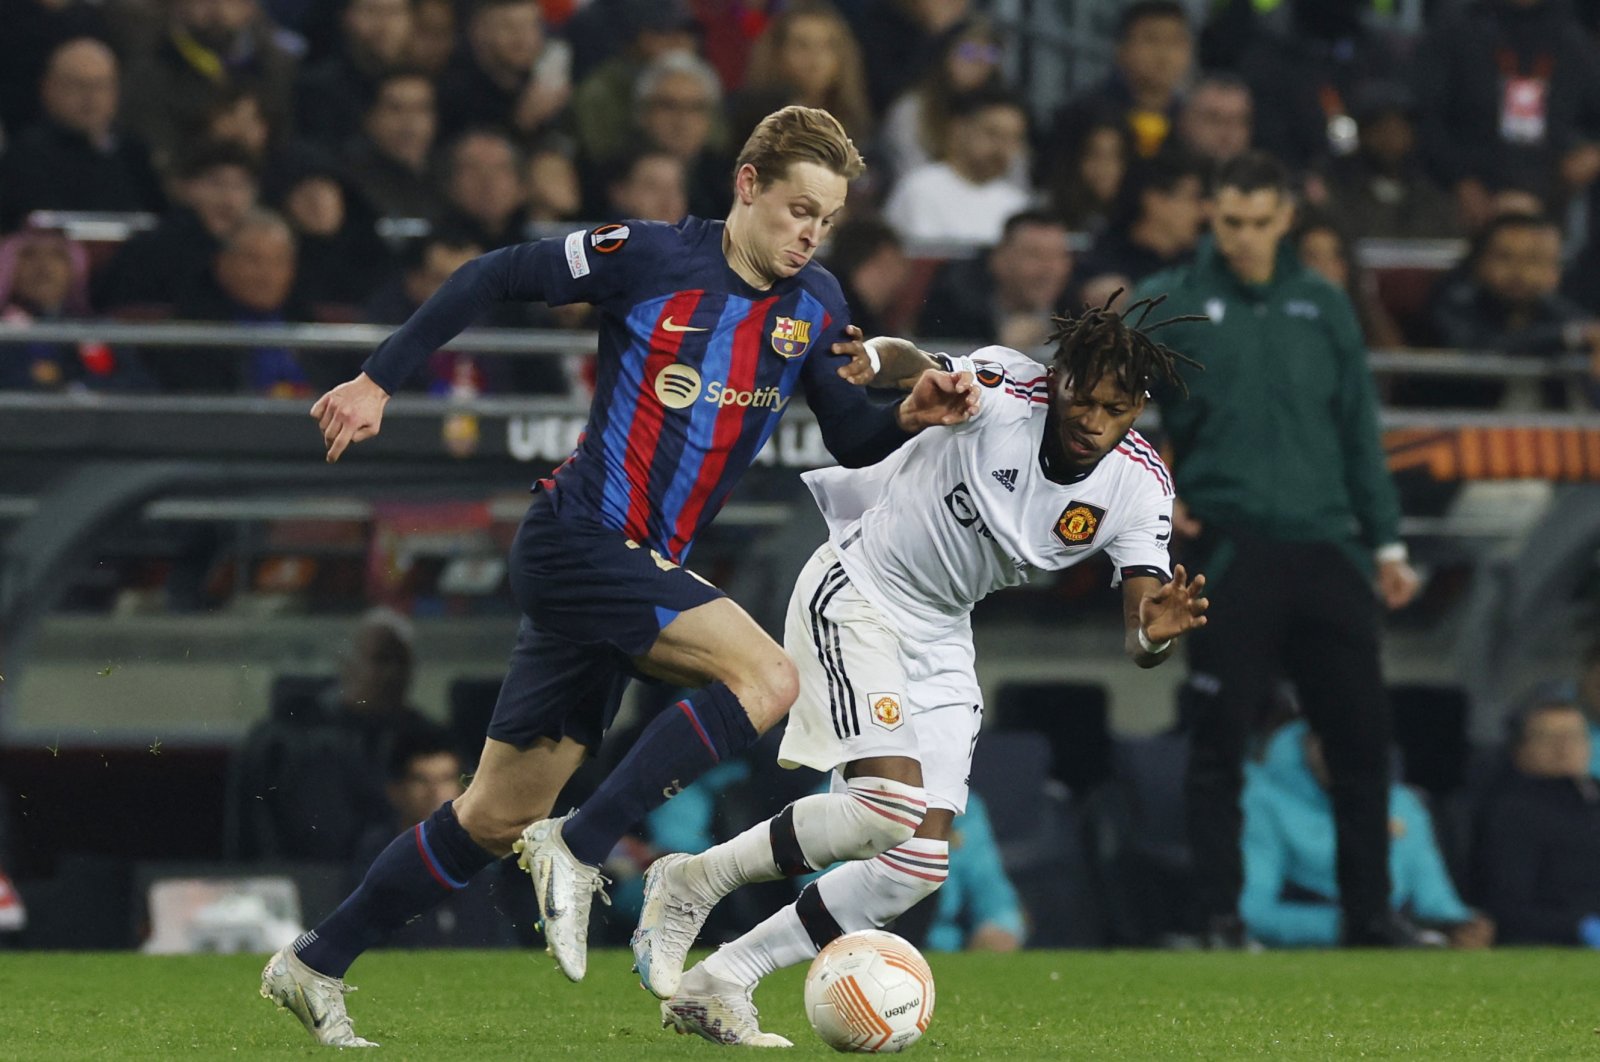 Manchester United&#039;s Fred in action with FC Barcelona&#039;s Frenkie de Jong during the Europa League playoff 1st leg tie at Camp Nou, Barcelona, Spain, Feb. 16, 2023. (Reuters Photo)